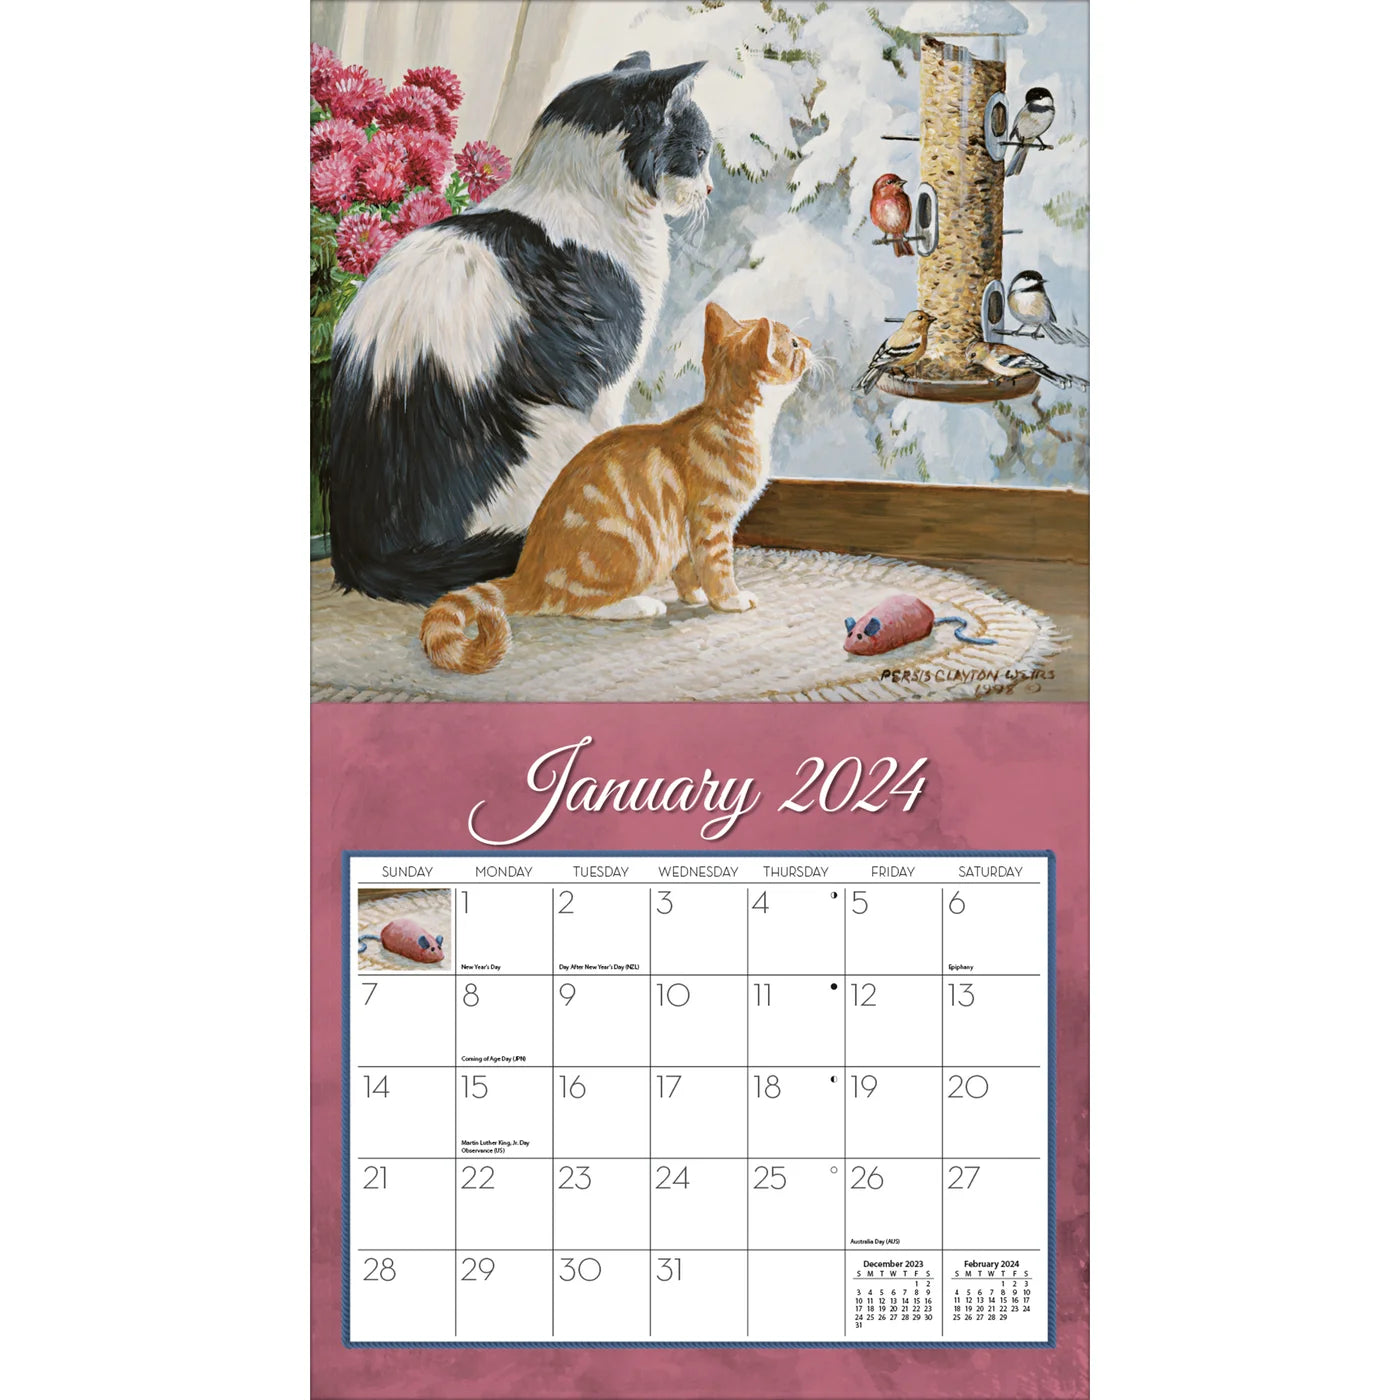 2024 LANG Love Of Cats By Persis Clayton Weirs Deluxe Wall Calendar